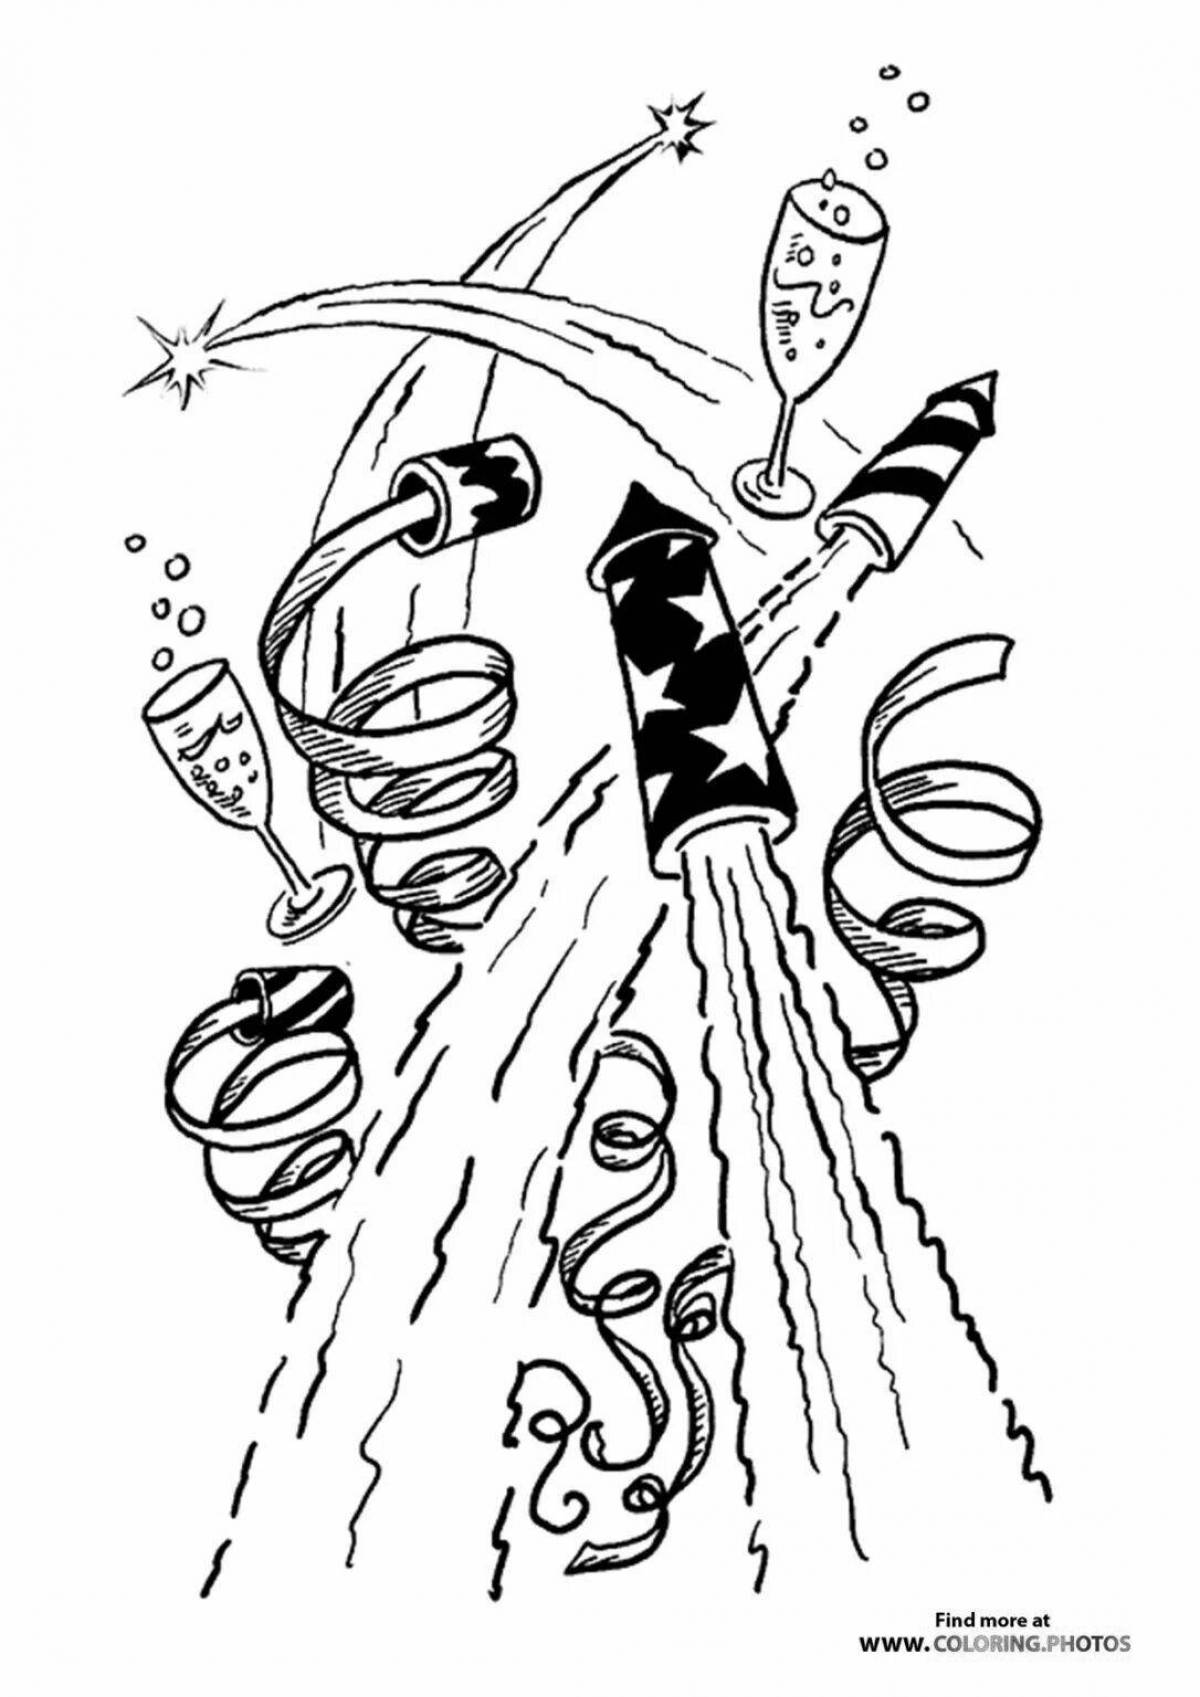 Sparkling Christmas cracker coloring page